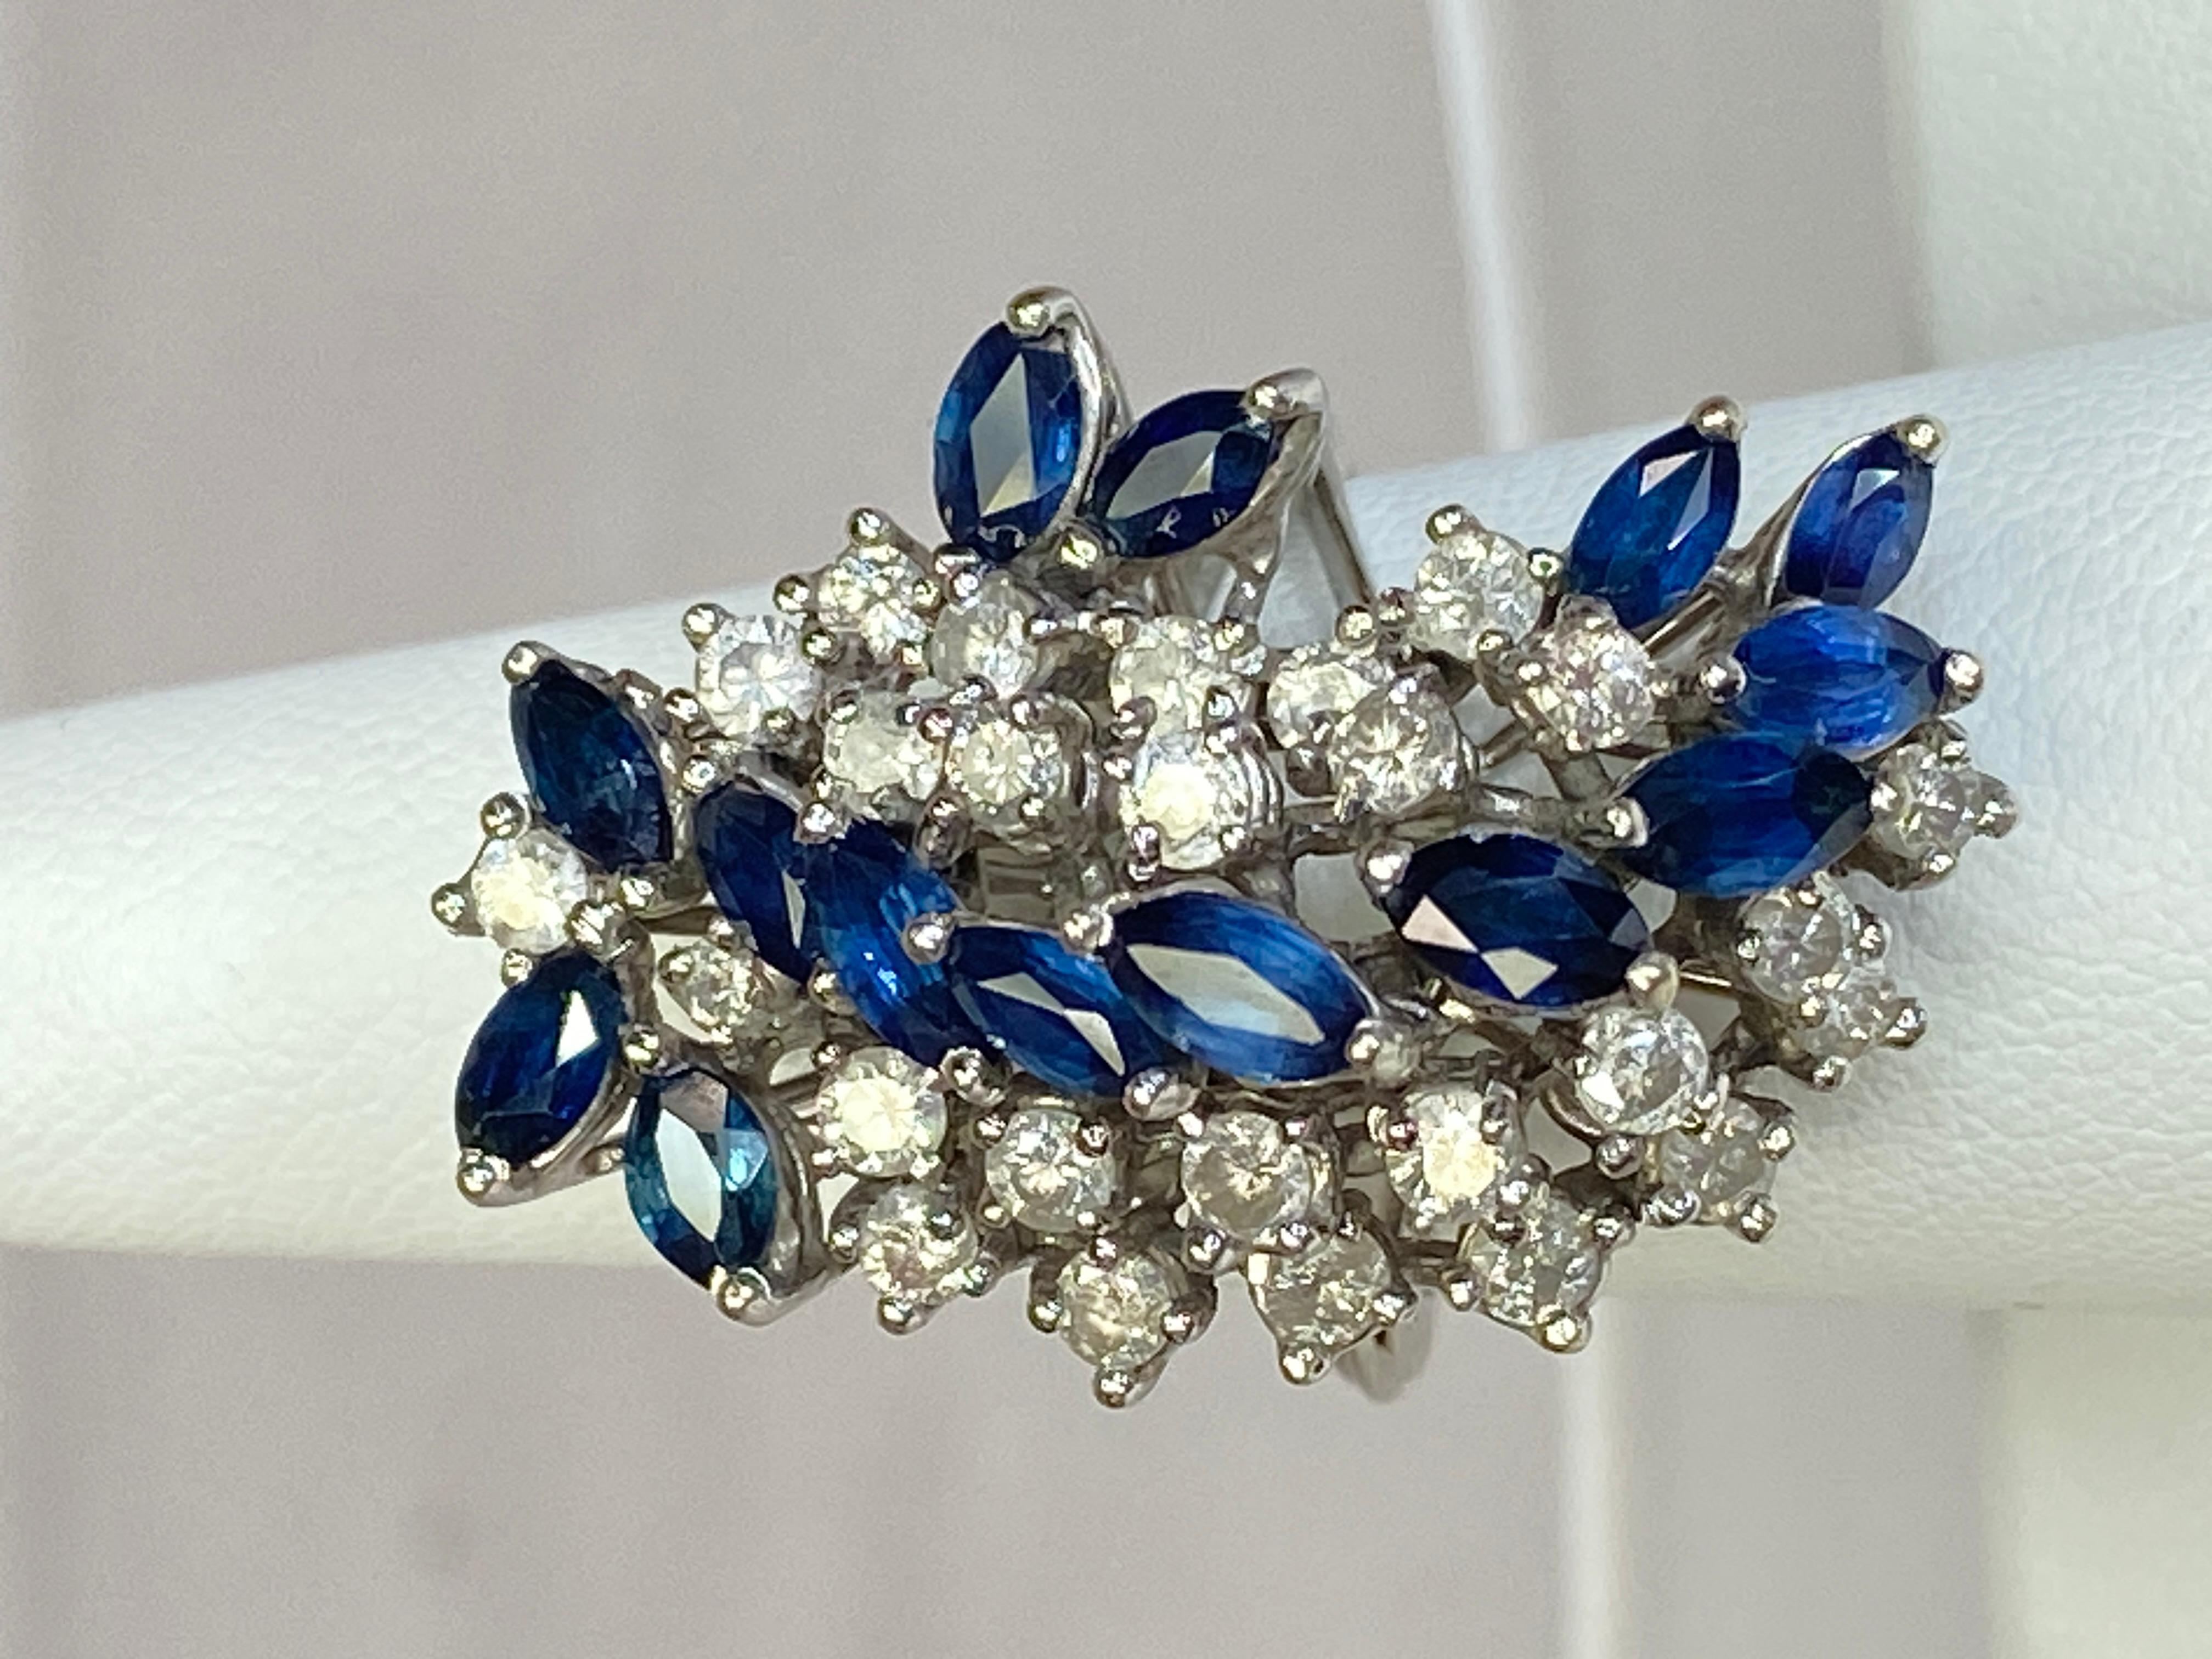 14K White Gold Diamond & Blue Sapphire 4.5 Carat Waterfall Cluster Ring Size 7.5 For Sale 3